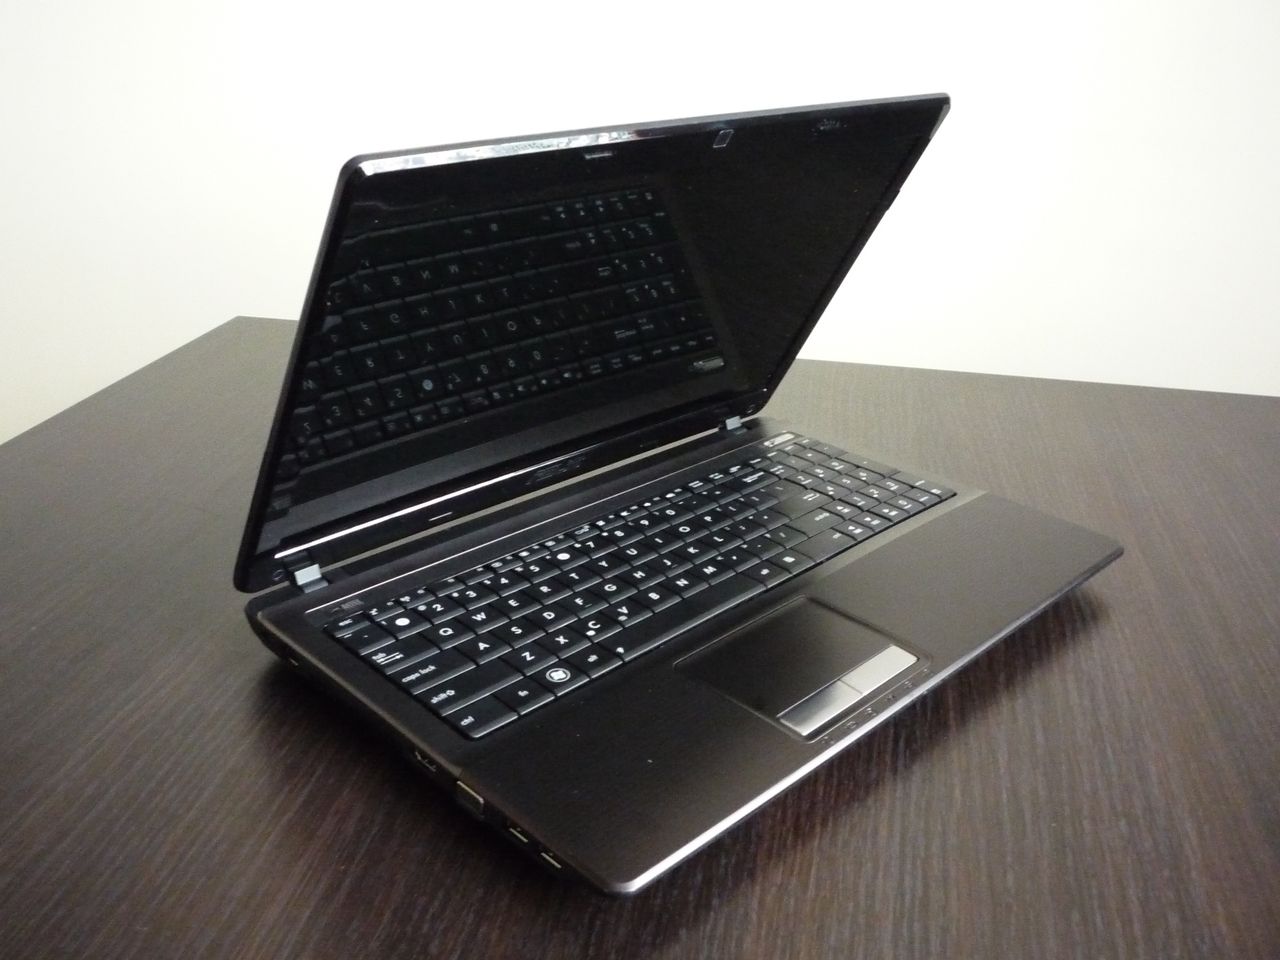 Asus K53BY